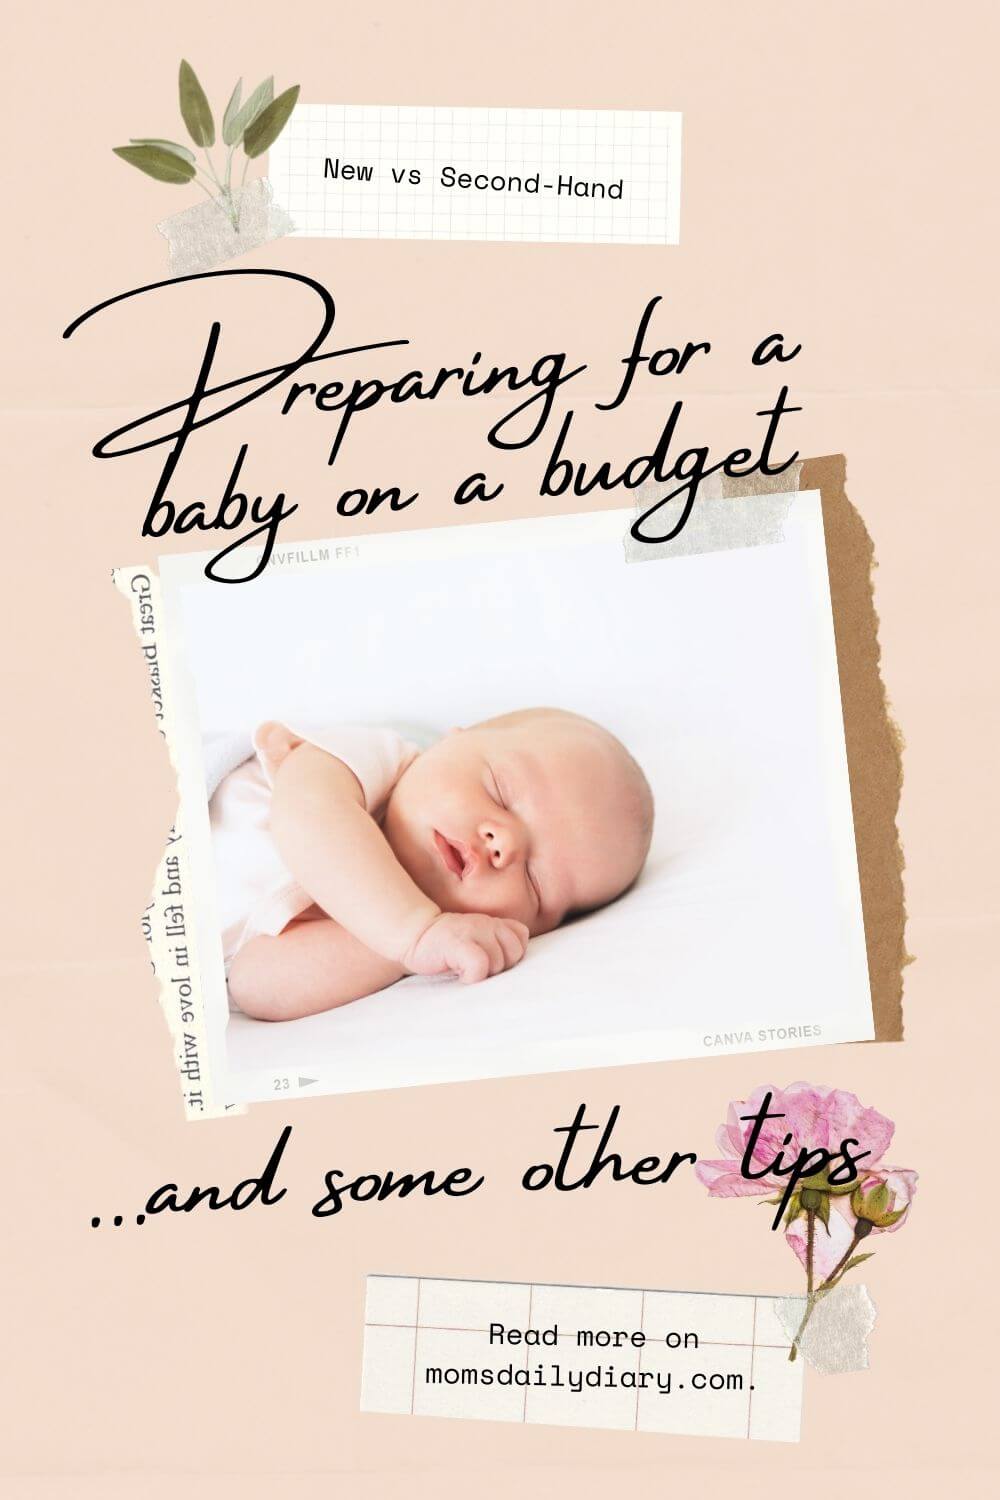 A newborn can be a huge expense. Luckily, you could save a bunch without compromising on quality by preparing for a baby on a budget.